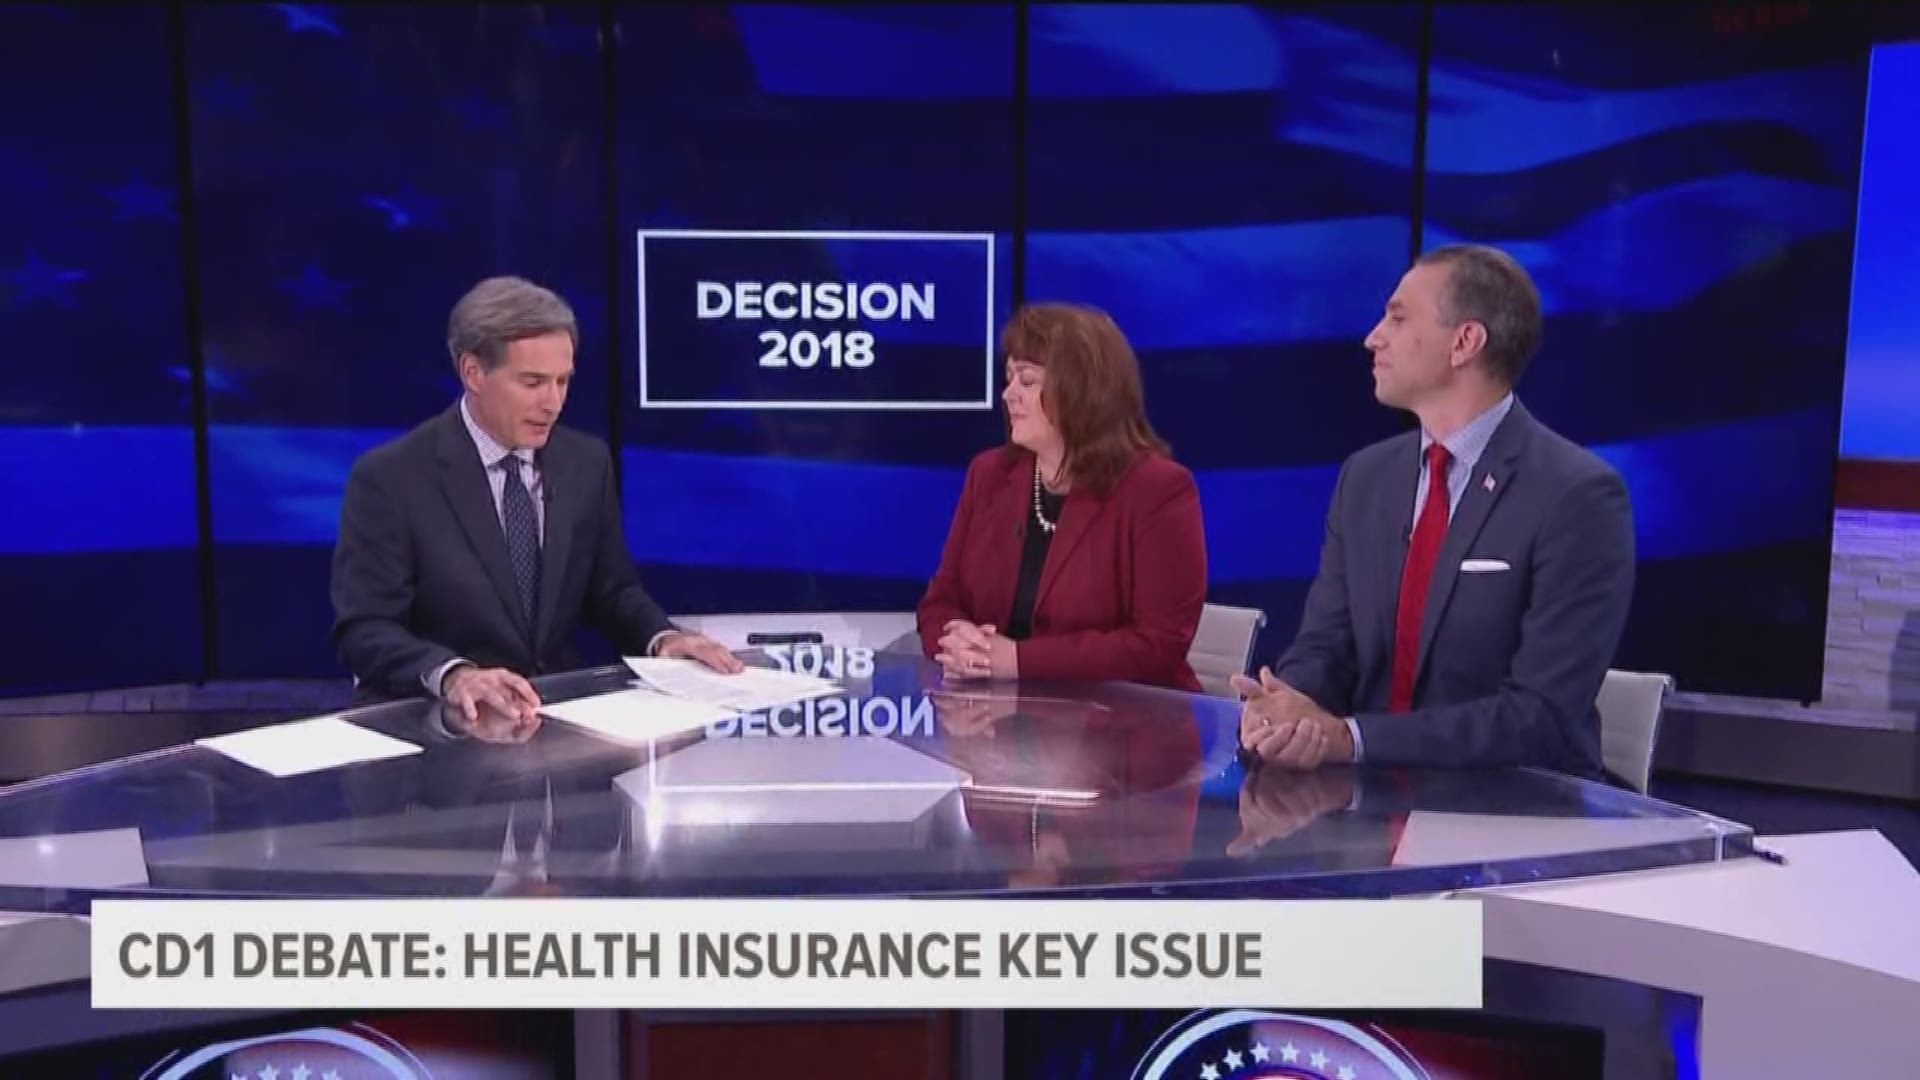 Republican candidates discuss whether they would cut back health insurance programs in district with large number of uninsured.